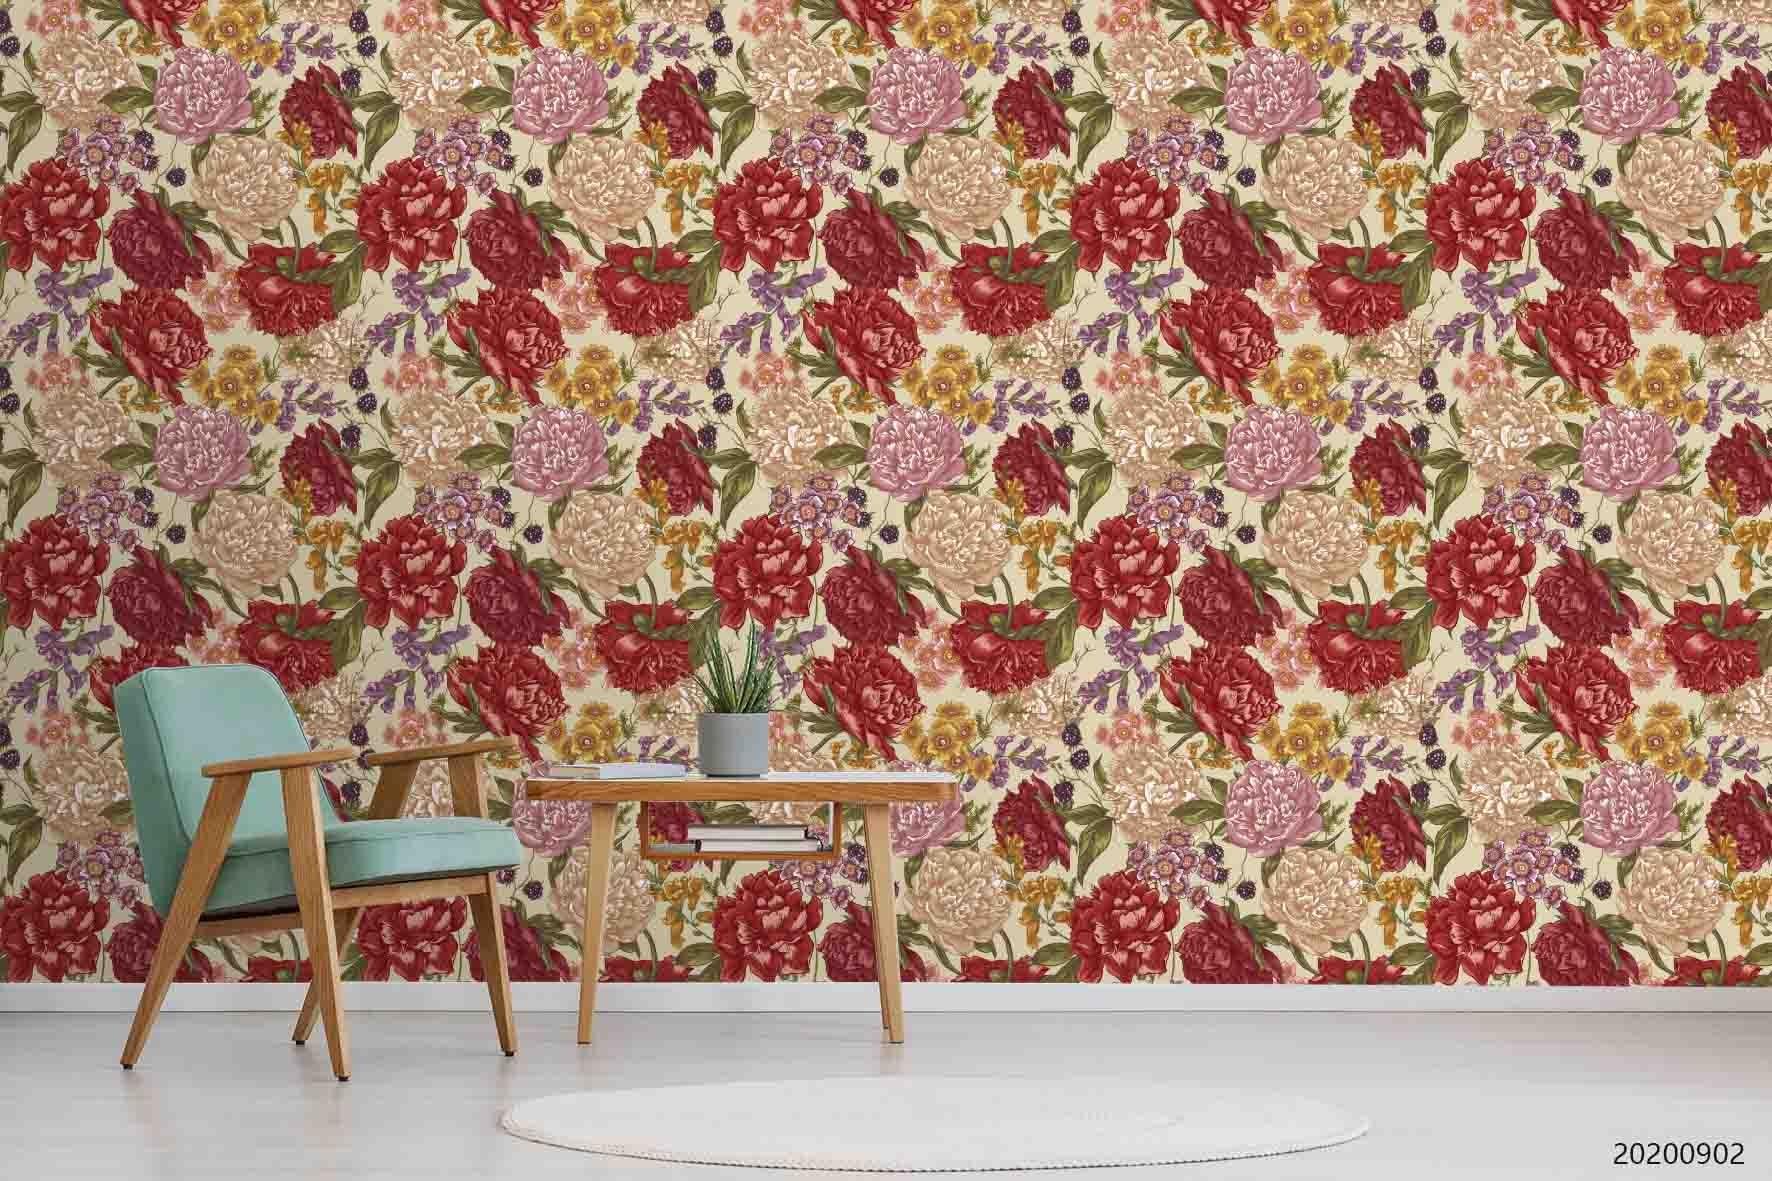 3D Hand Sketching Red Floral Plant Wall Mural Wallpaper LXL 1312- Jess Art Decoration